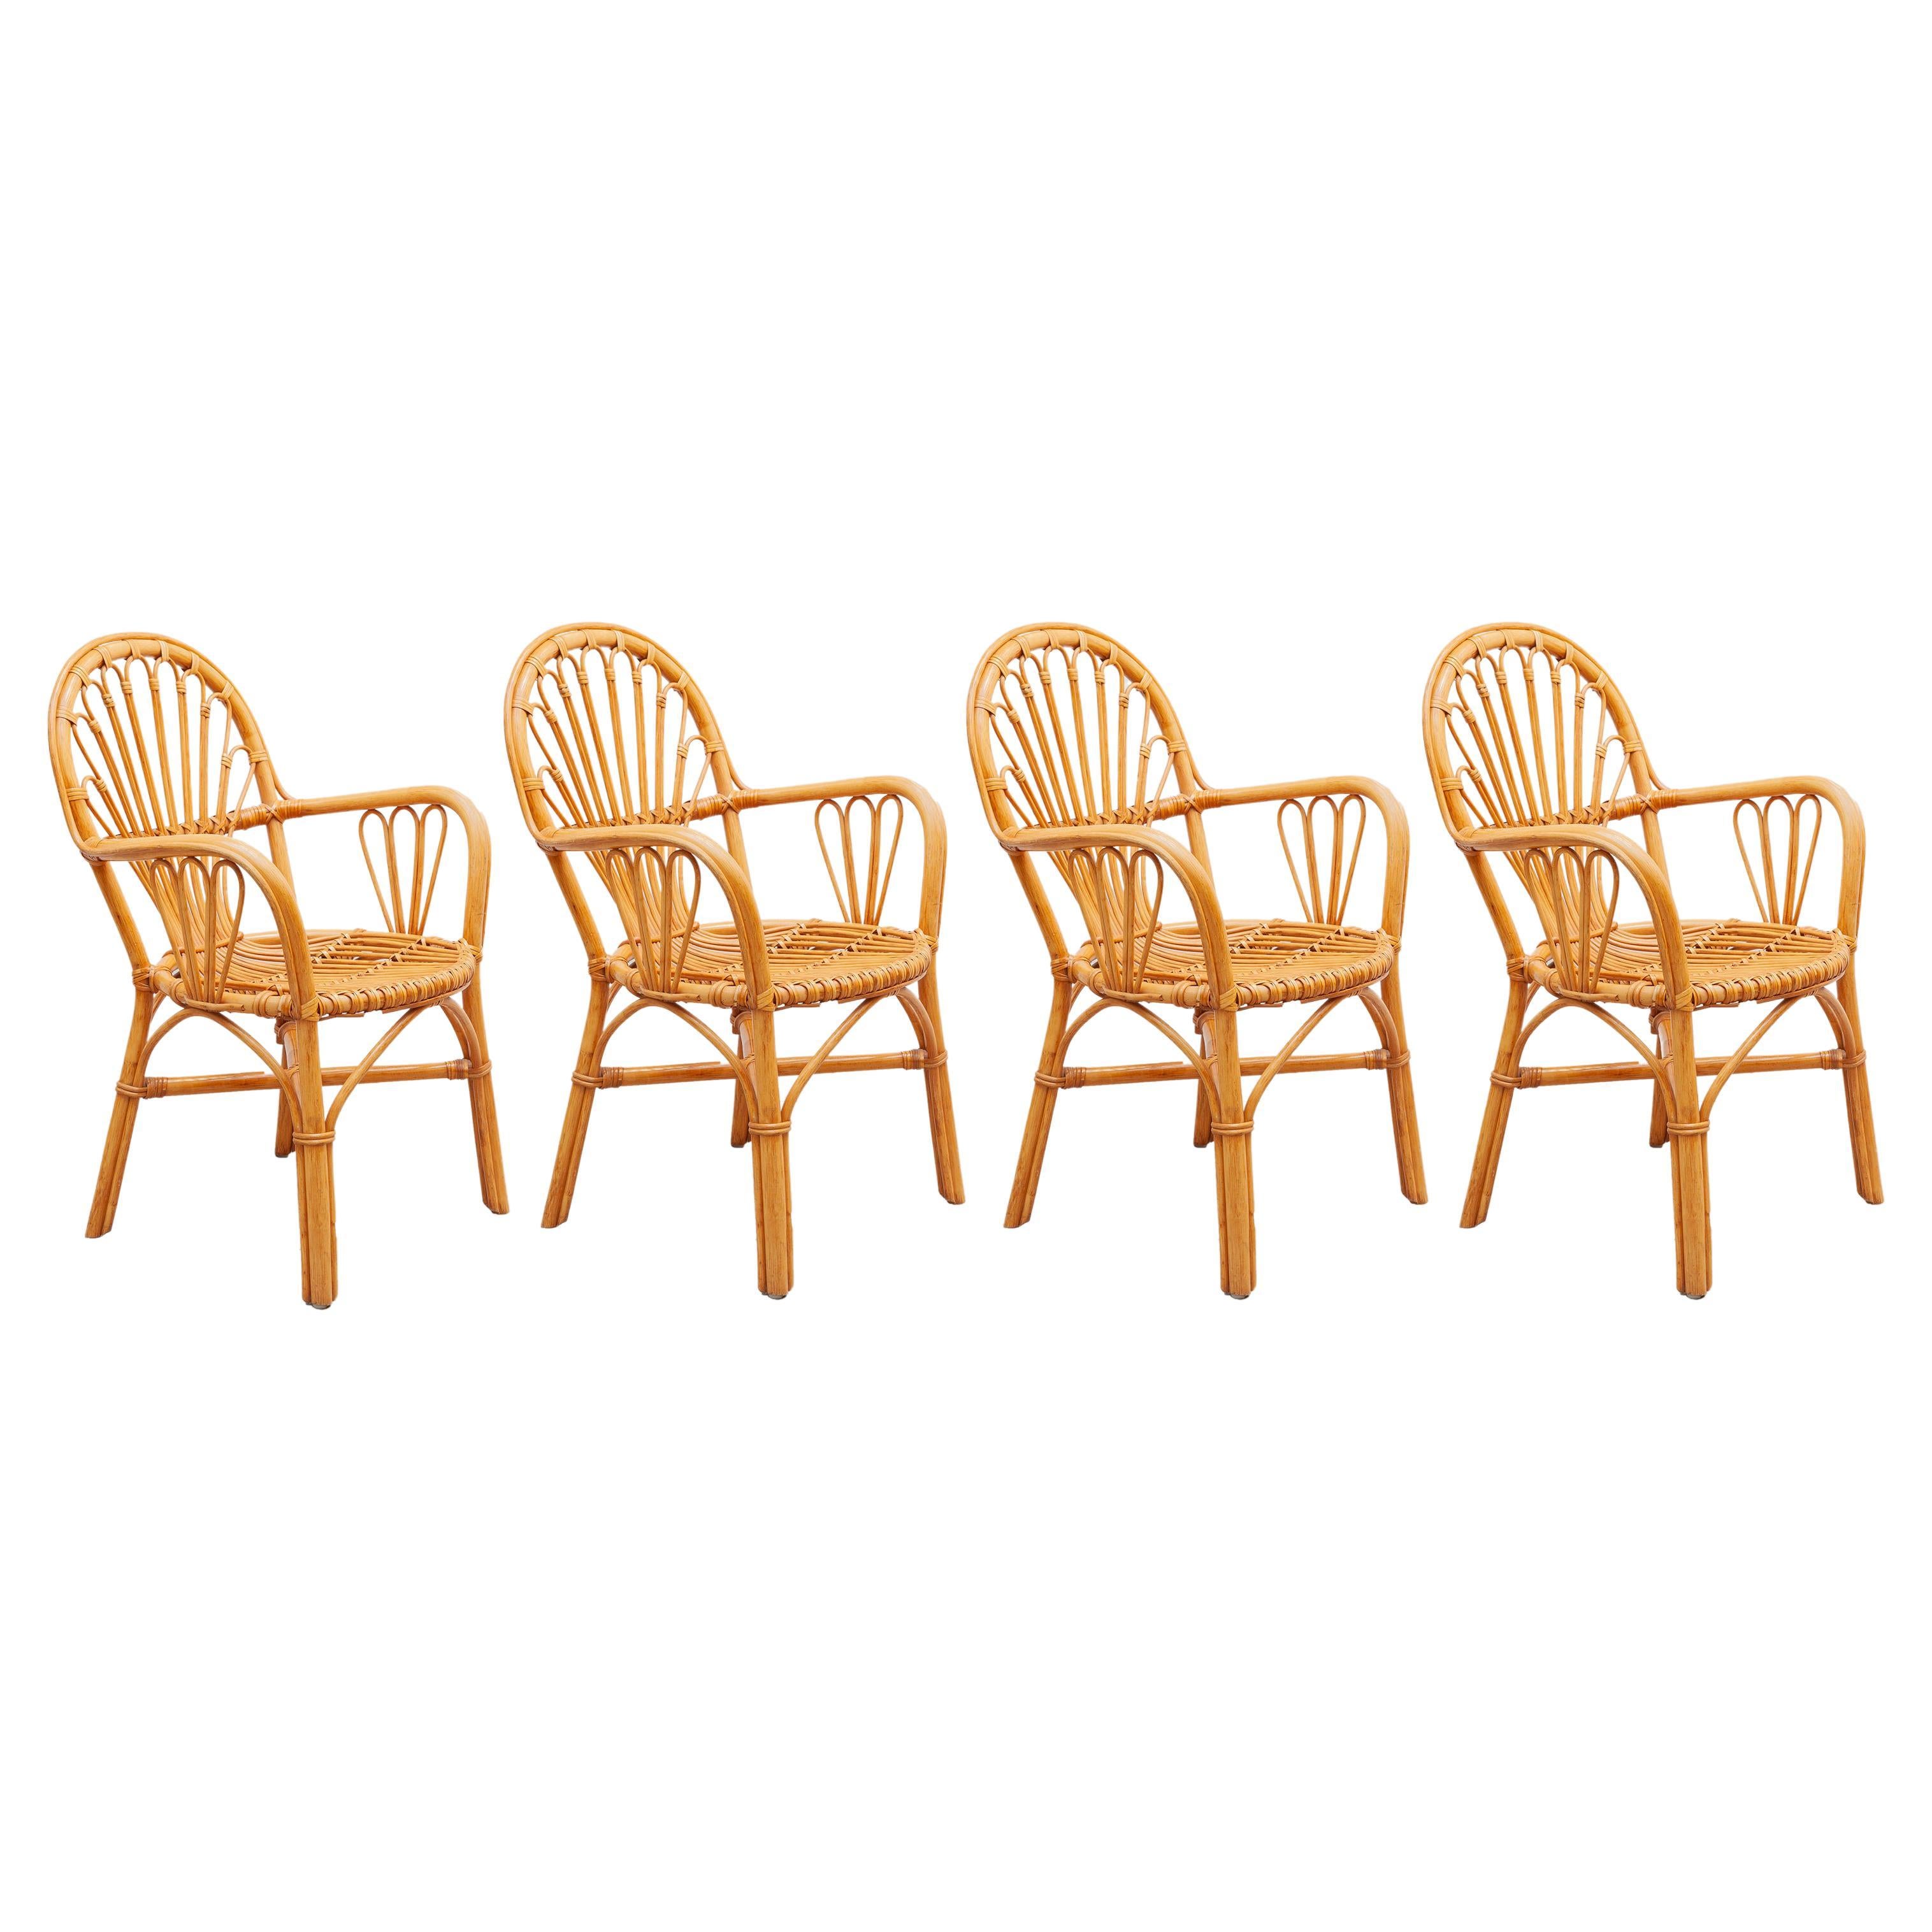 Set of Four Italian Organic Bamboo Lounge Chairs, 1970s For Sale